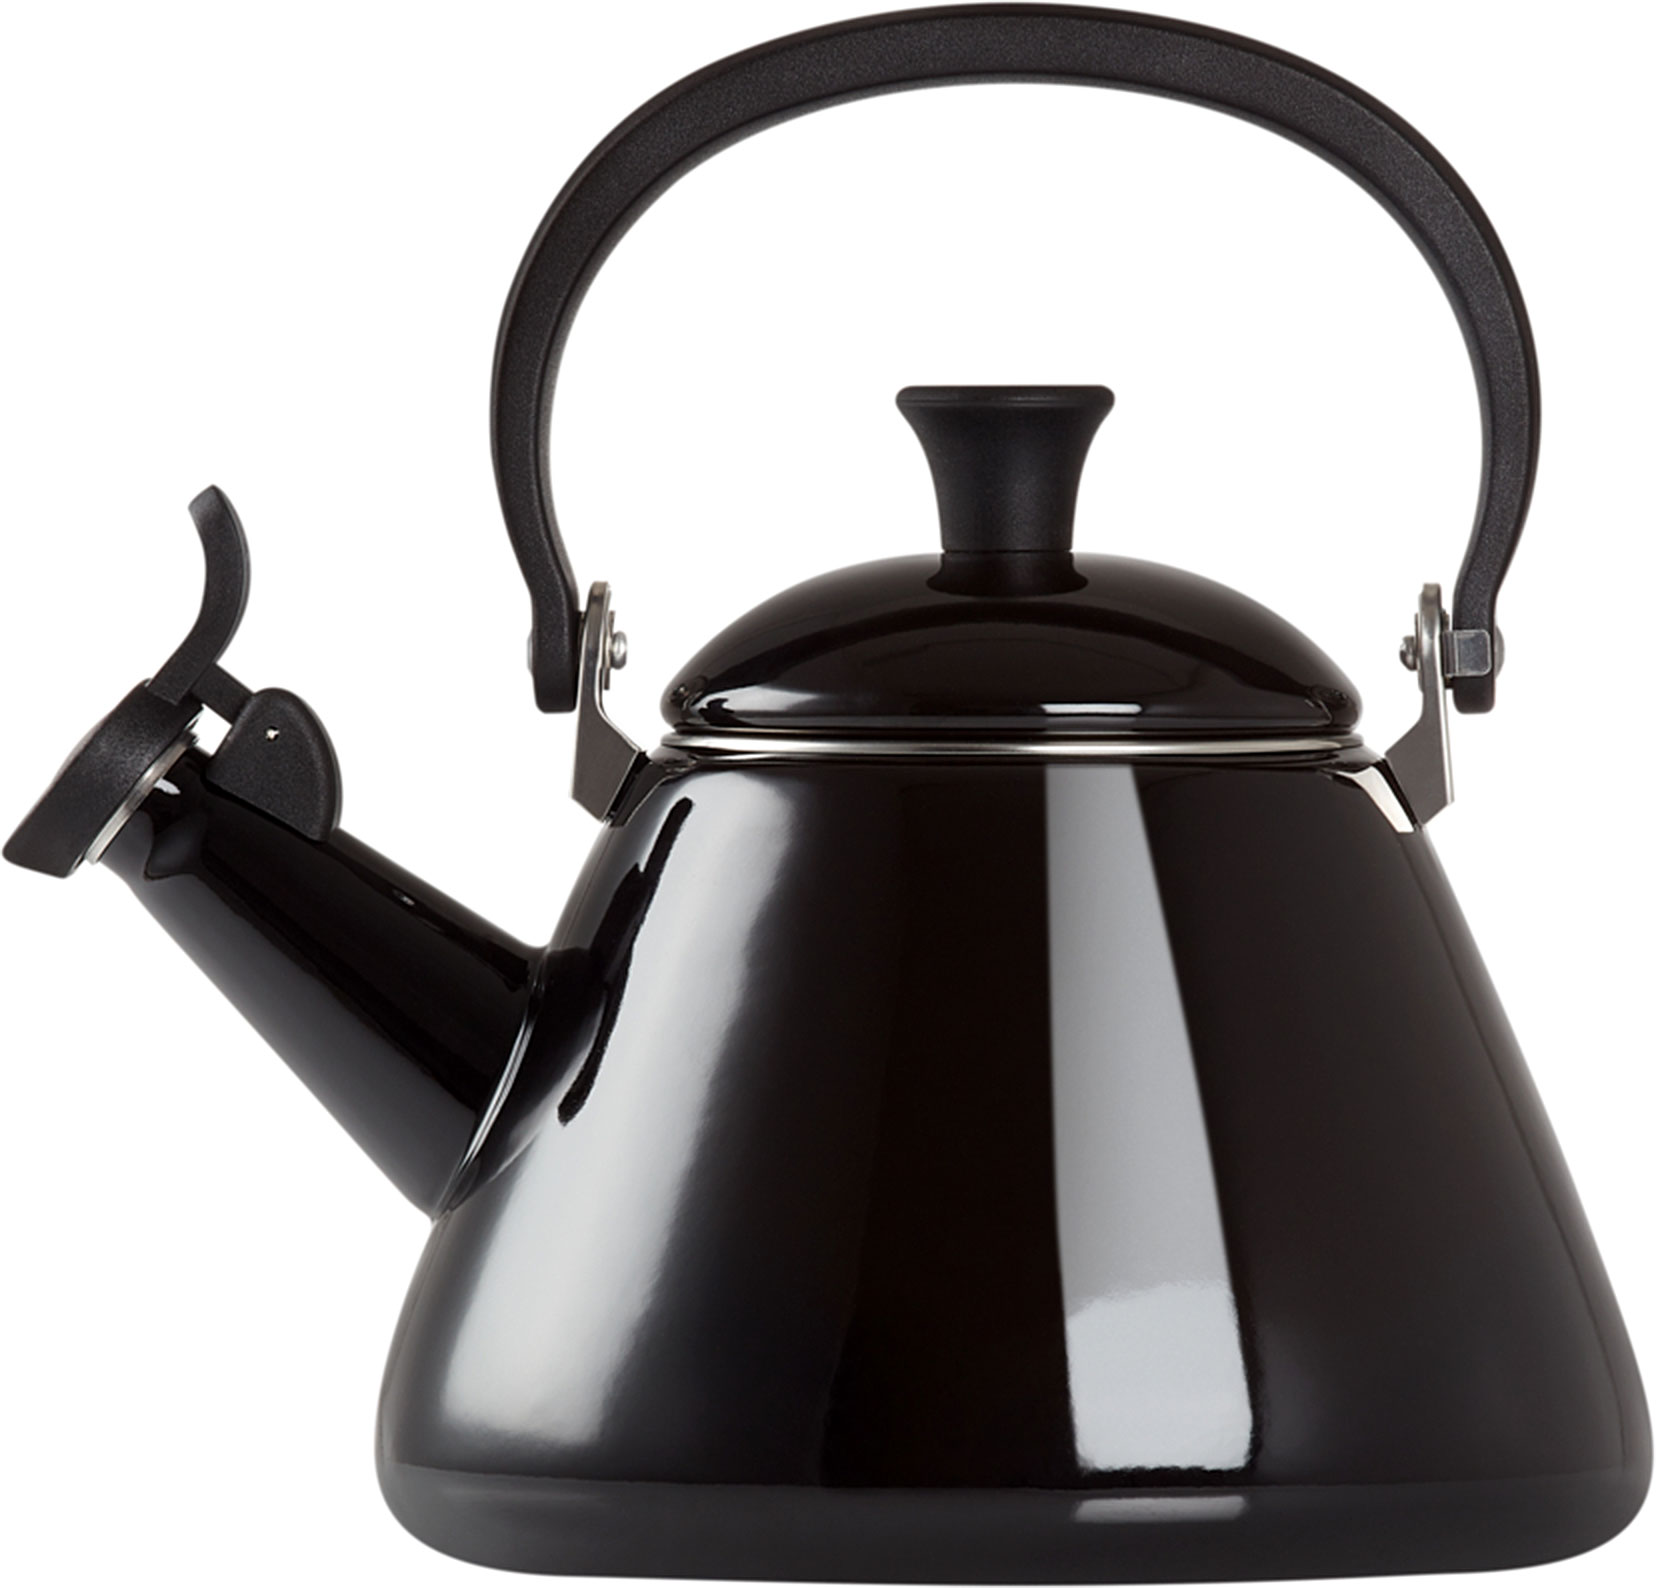 Le Creuset Kone Stovetop Kettle 1.6L with Whistle